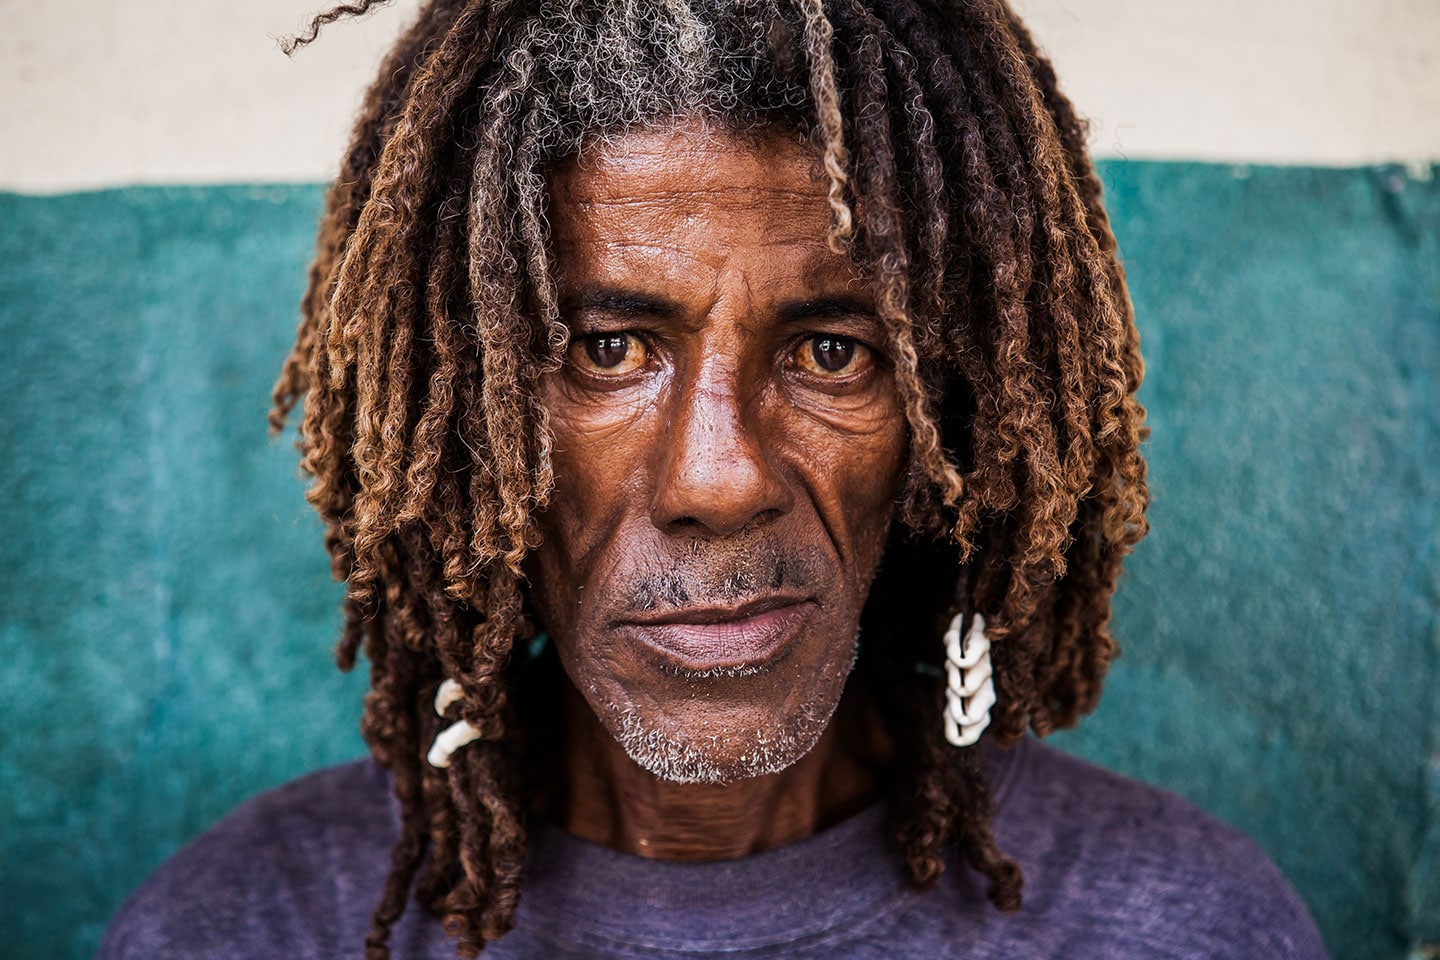 Old man with African roots in Havana, Cuba